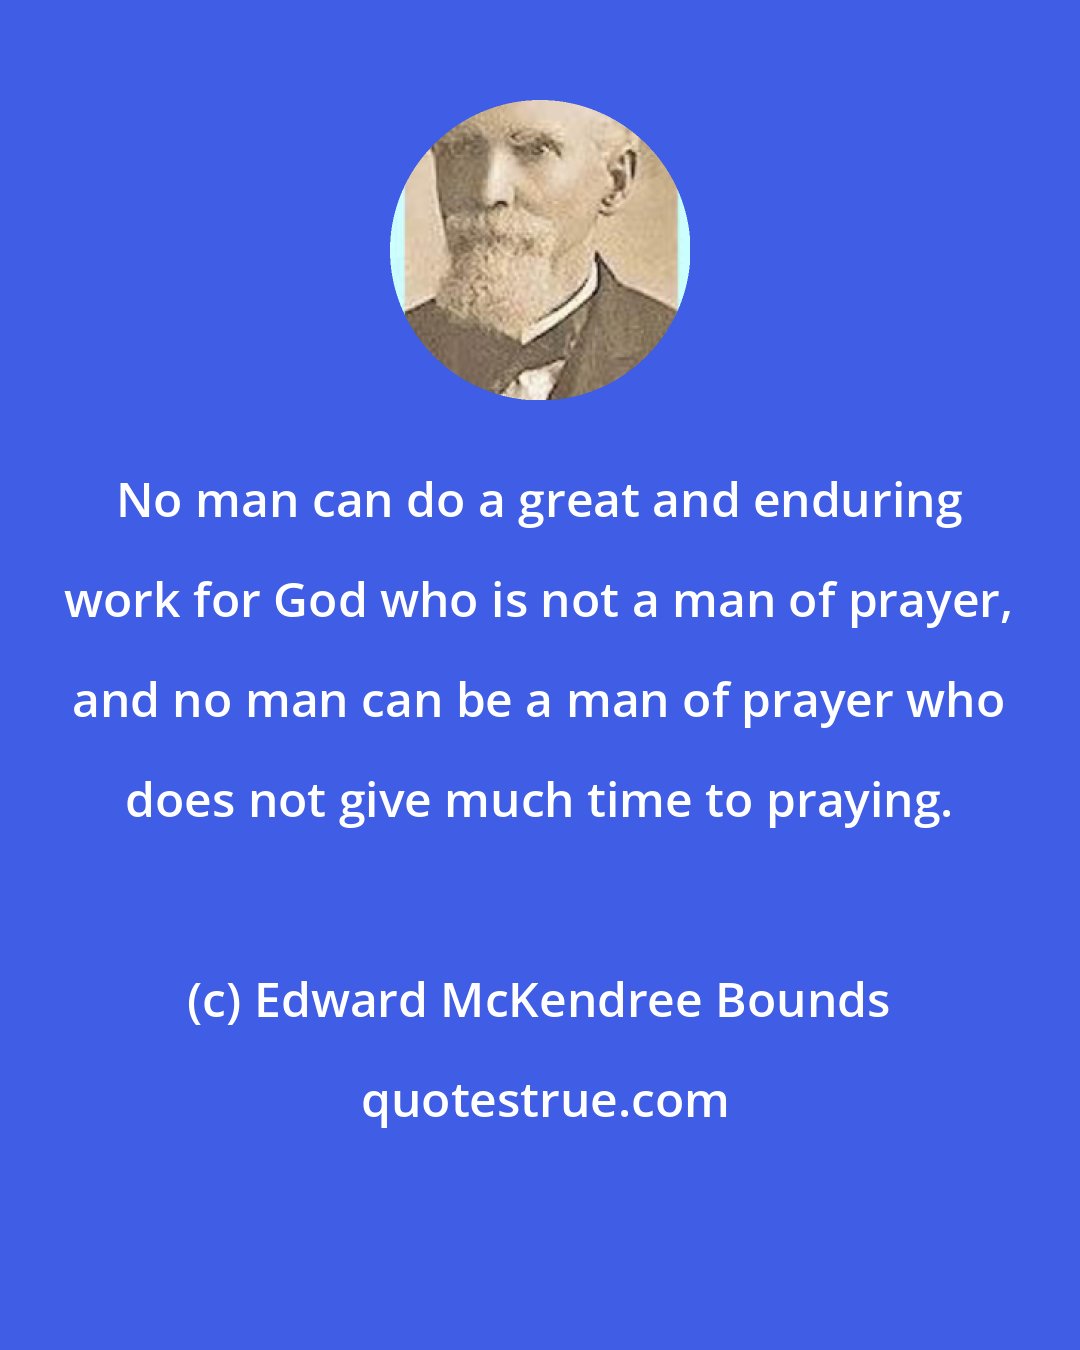 Edward McKendree Bounds: No man can do a great and enduring work for God who is not a man of prayer, and no man can be a man of prayer who does not give much time to praying.